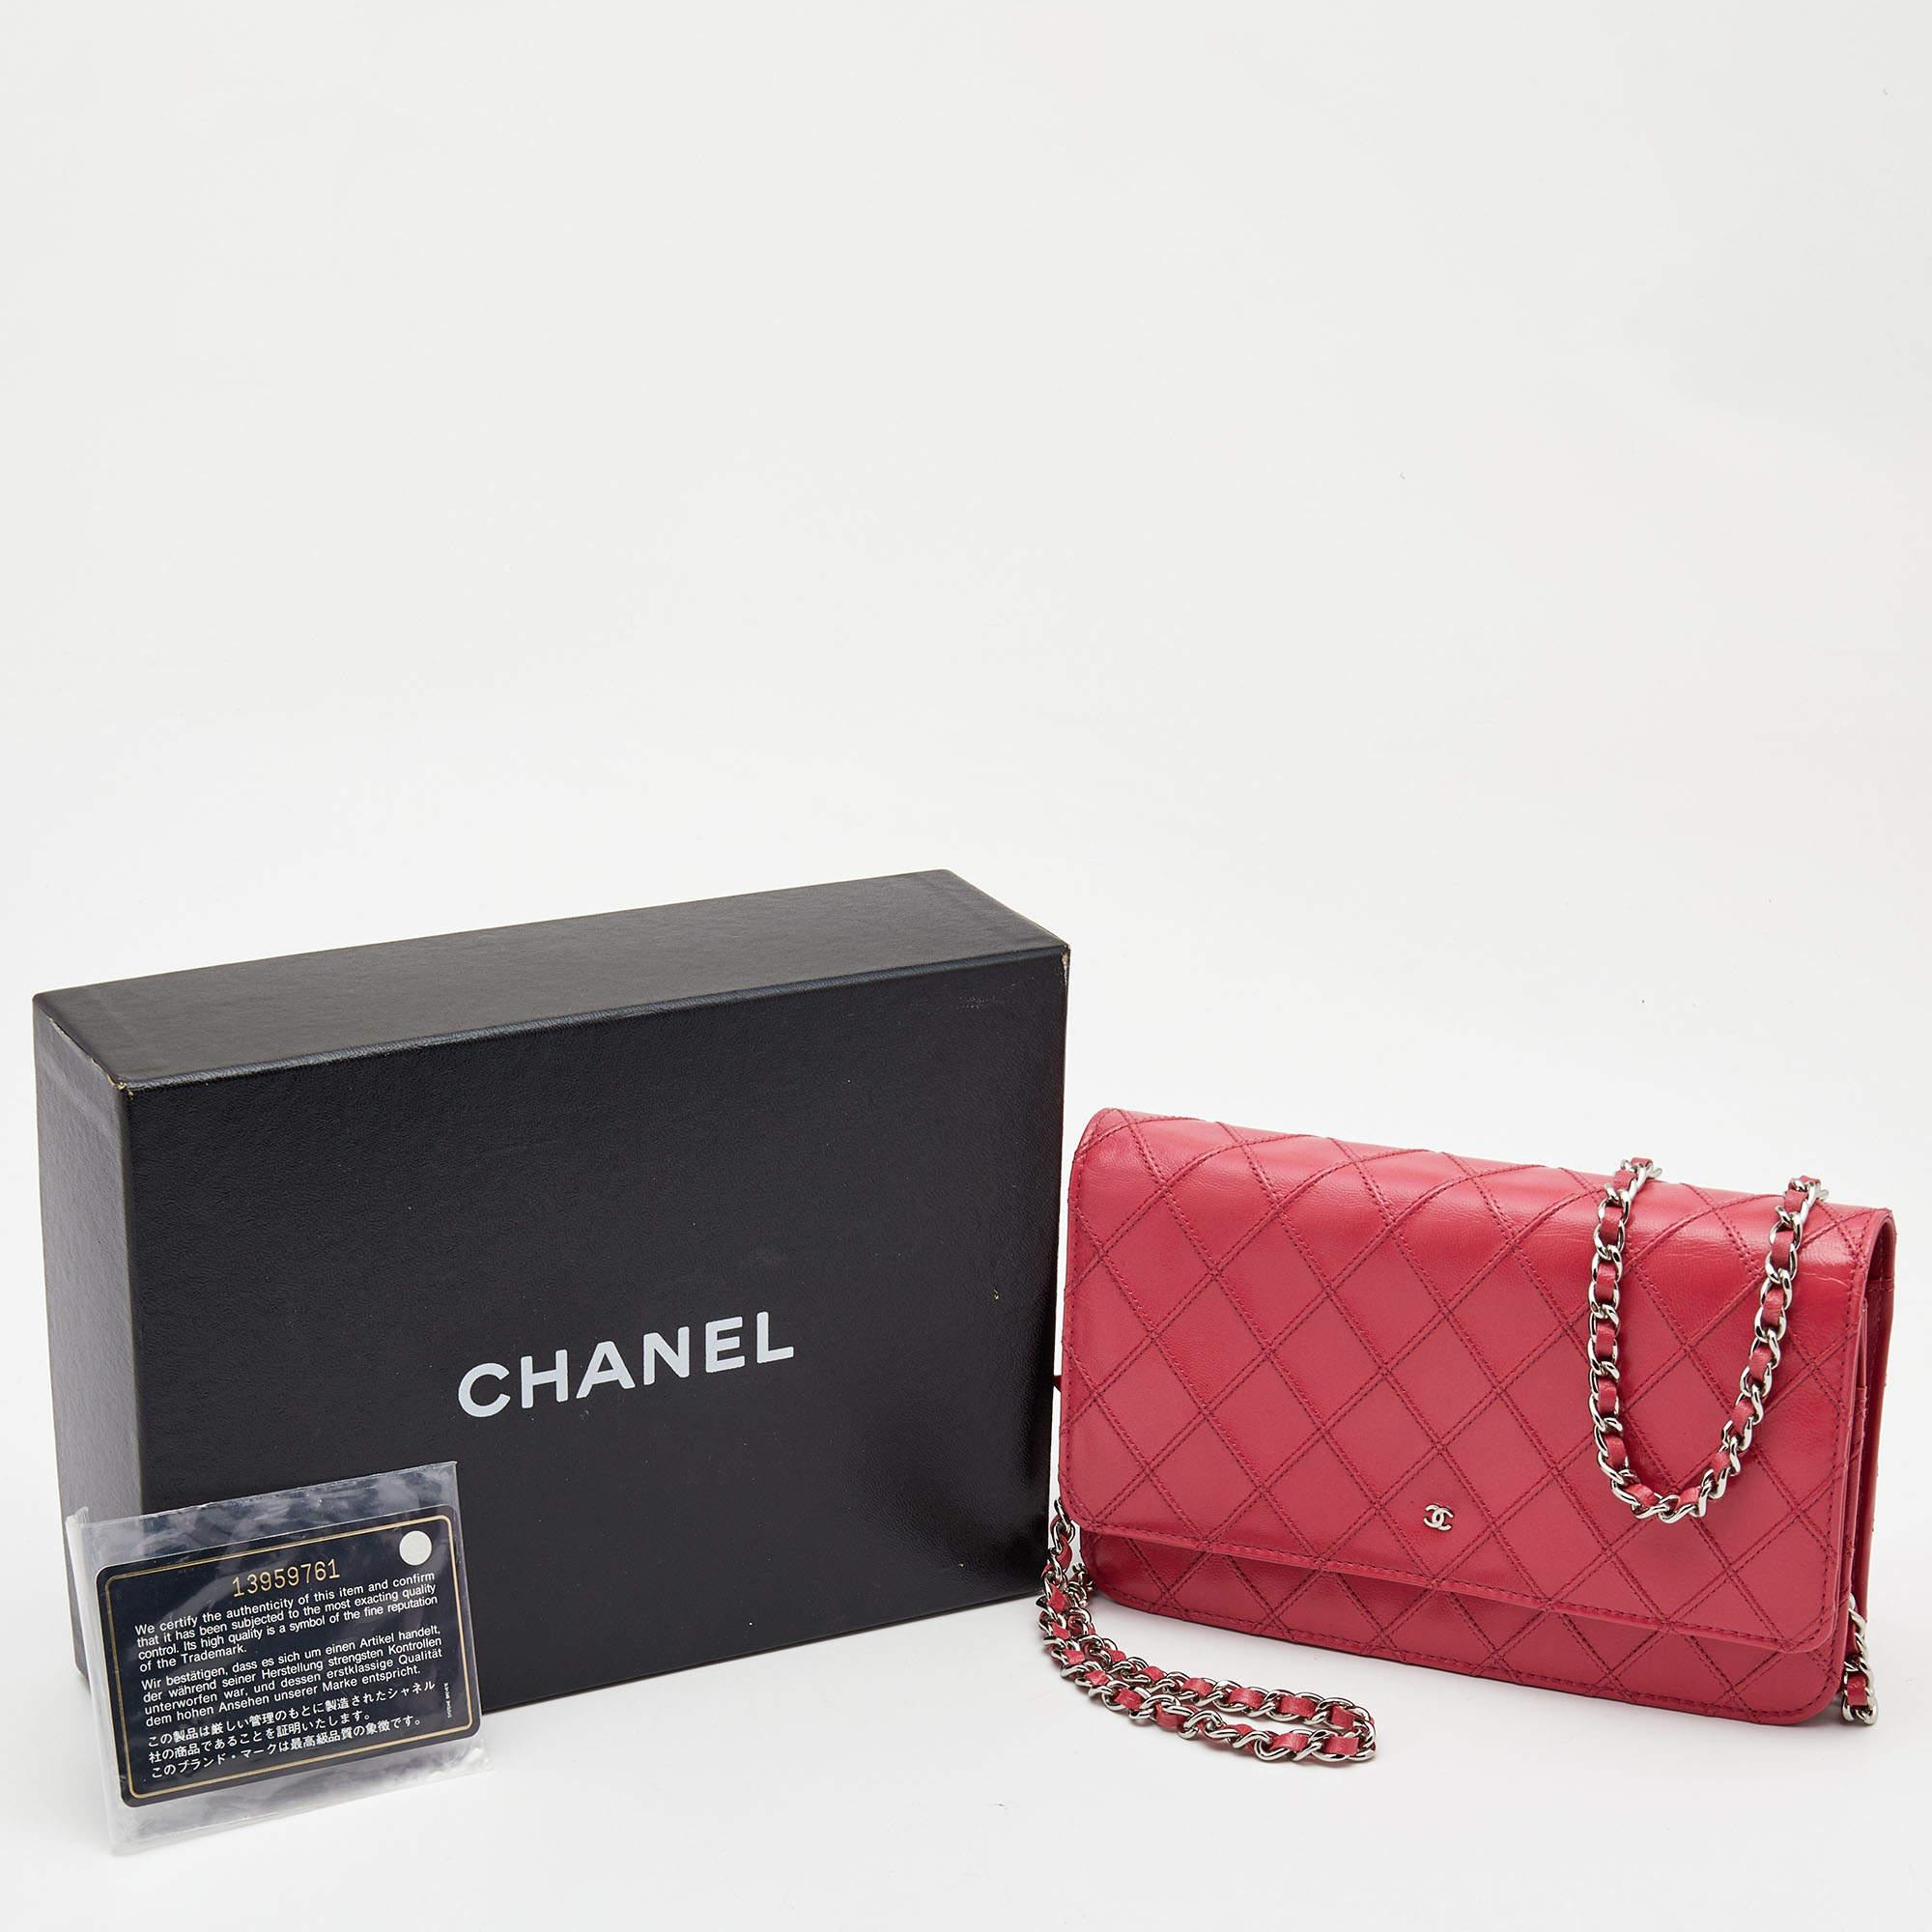 Chanel Pink Quilted Leather WOC Bag For Sale 8